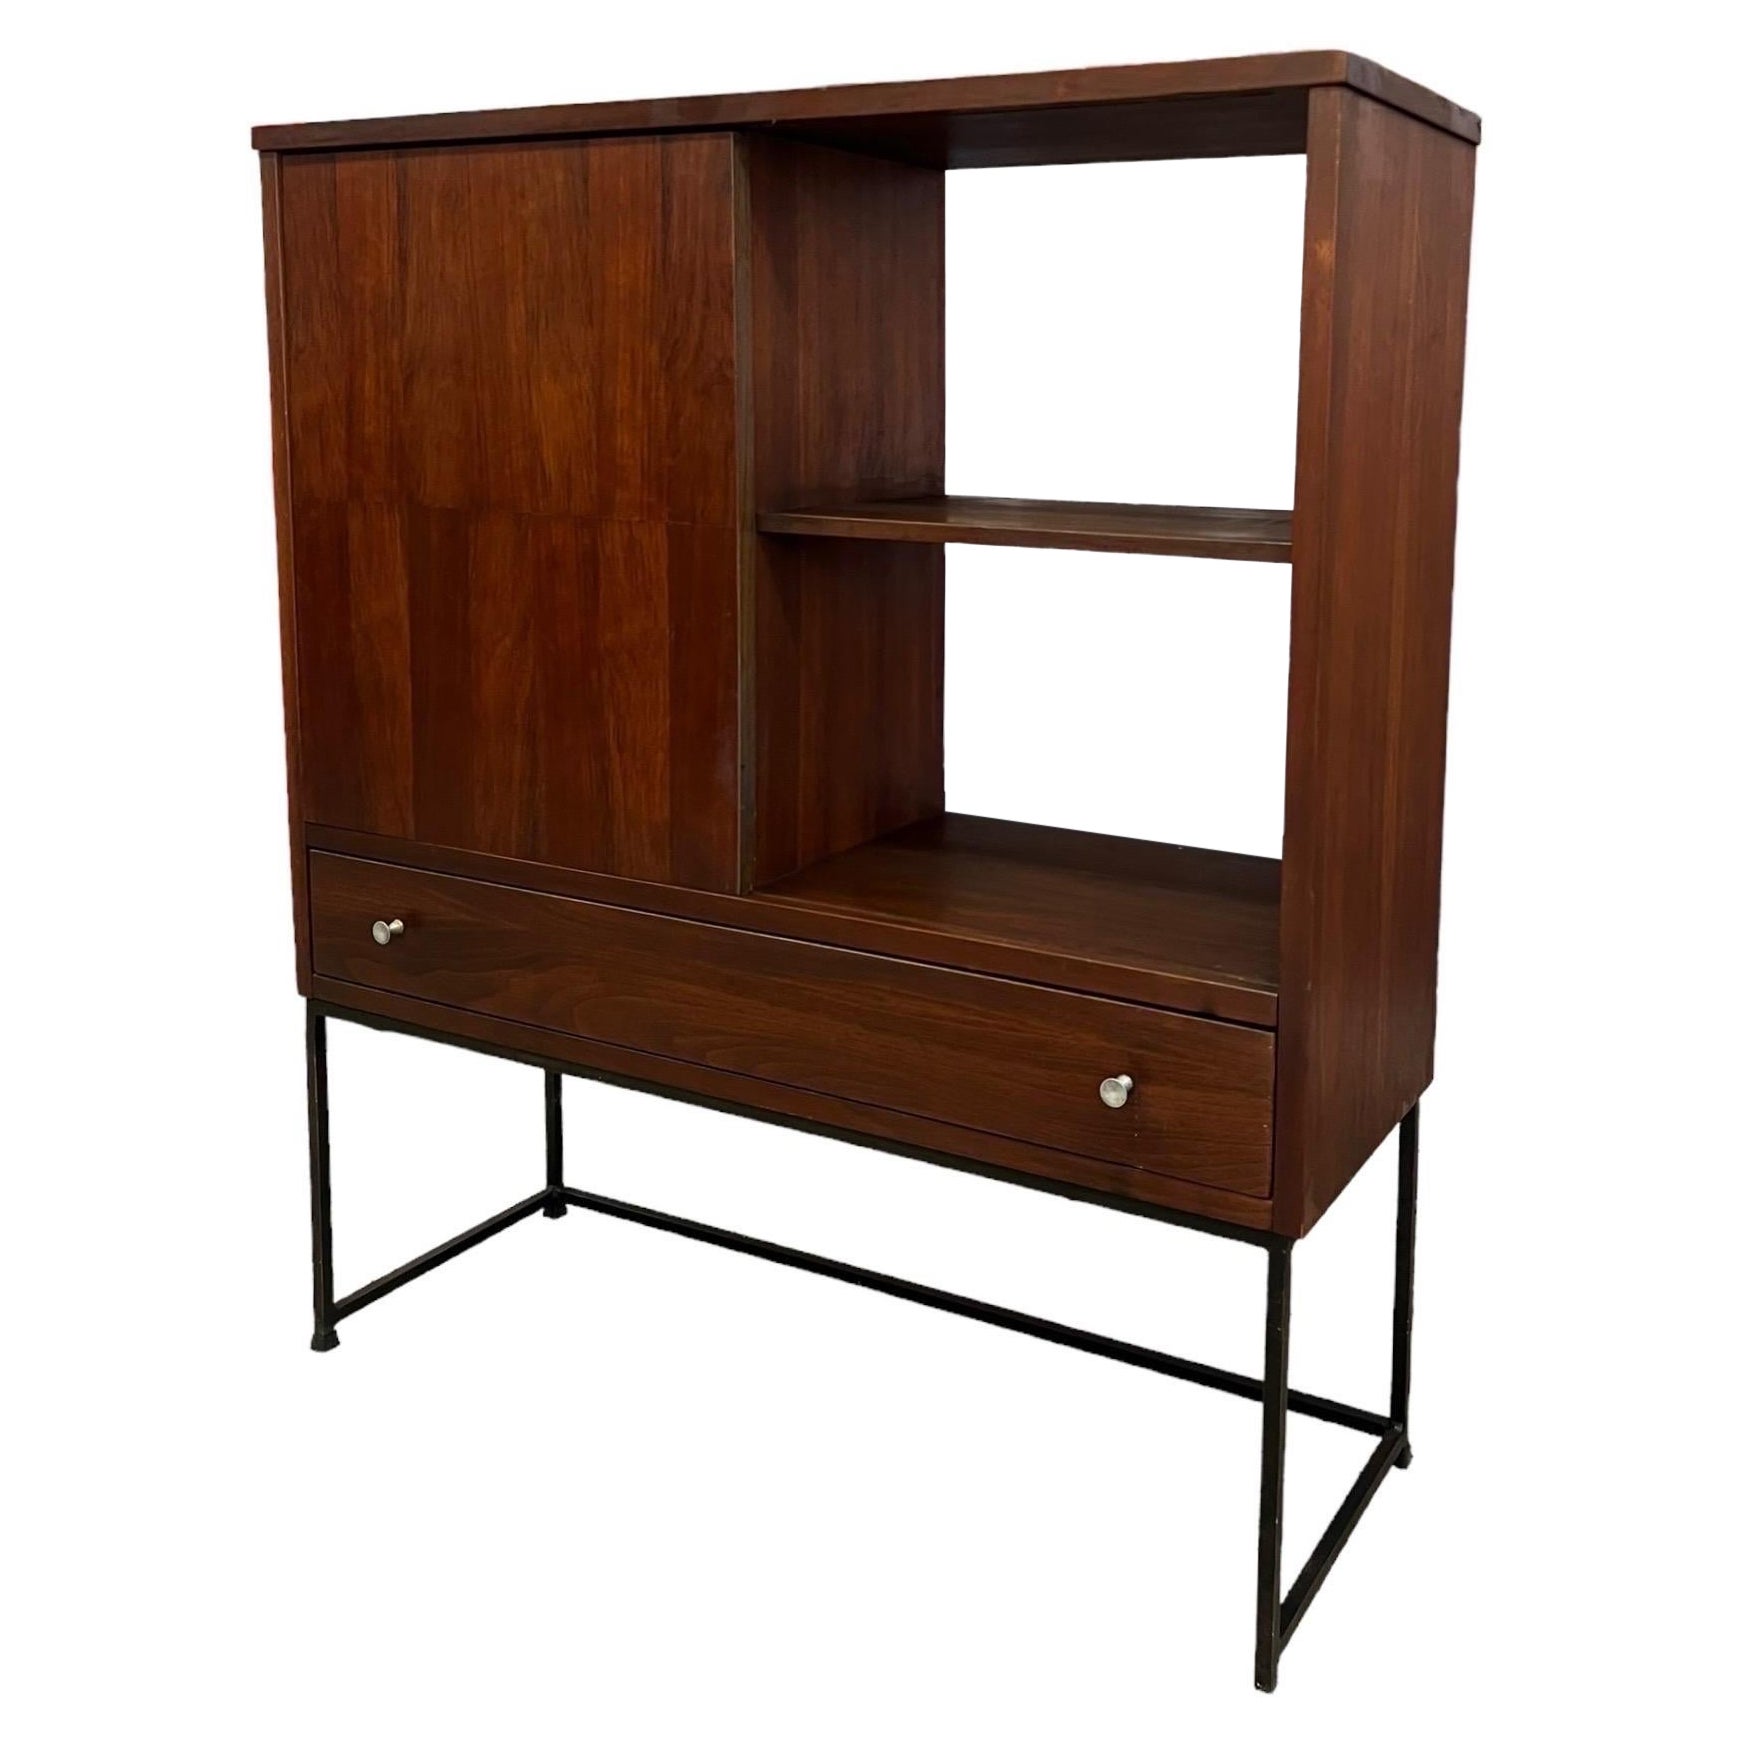 Vintage Mid Century Modern Bookshelf With Sliding Door and Dovetailed Drawers